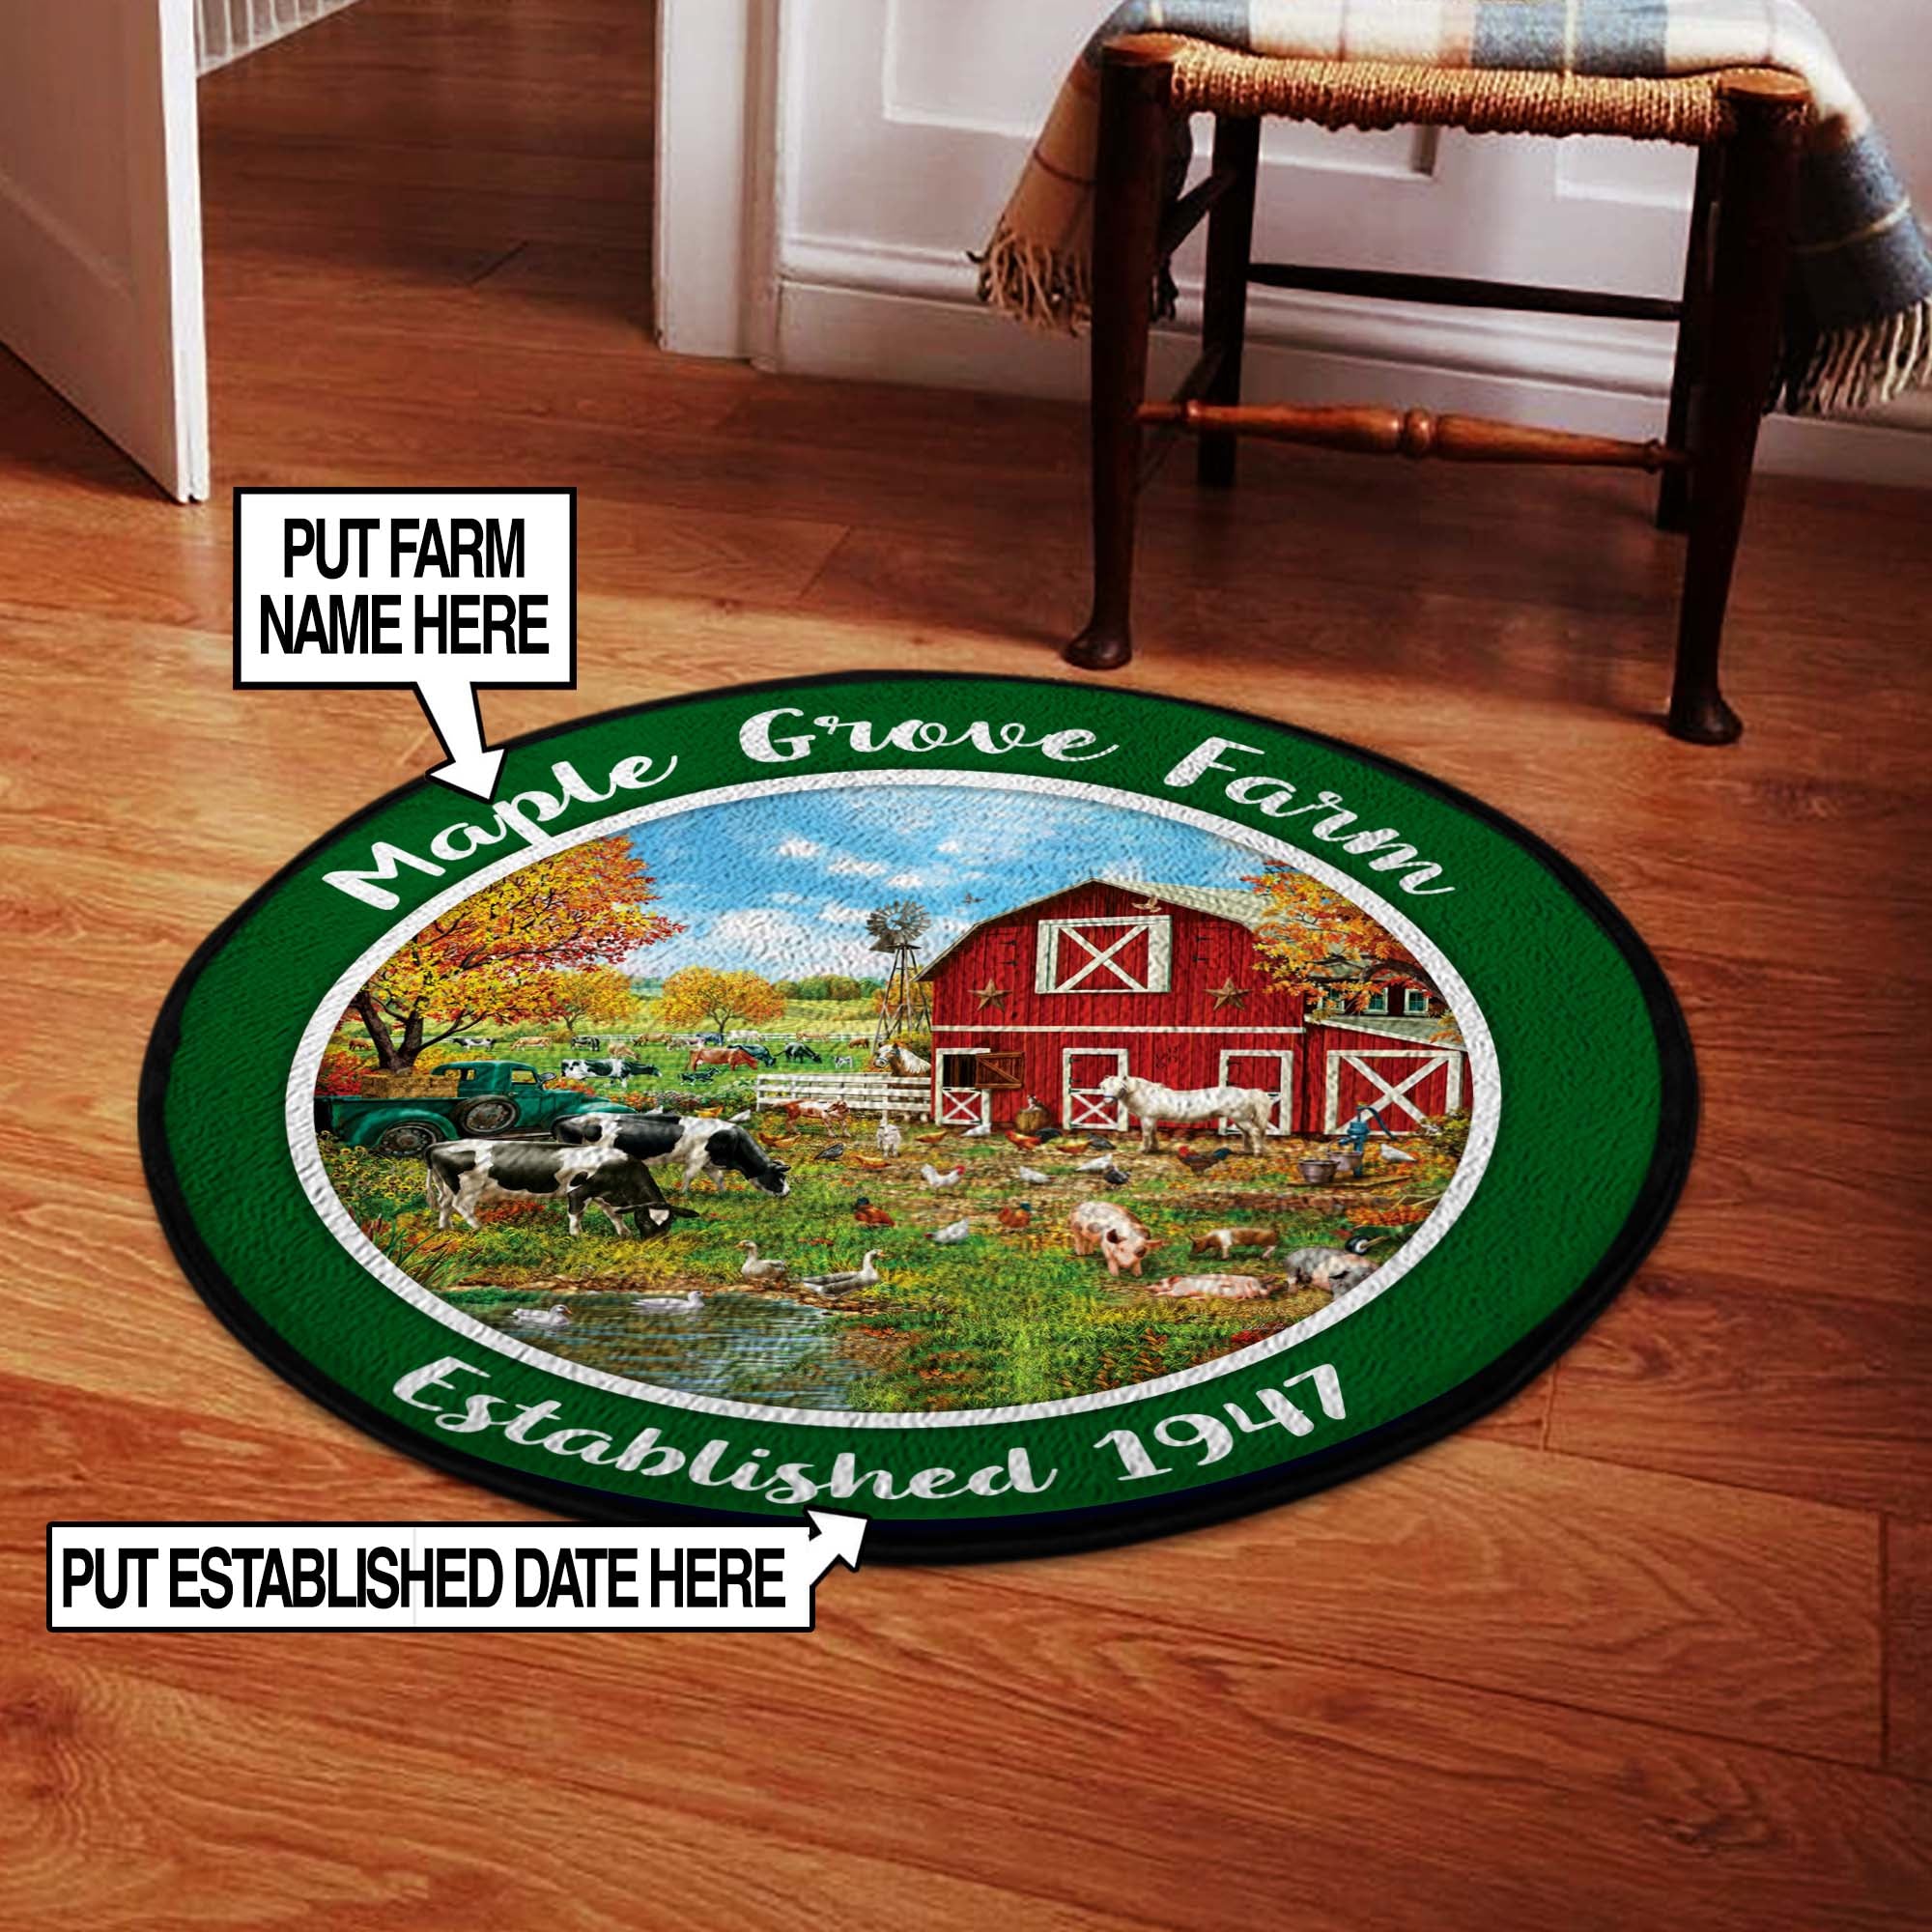 Personalized Farm Established Date Round Mat 06440